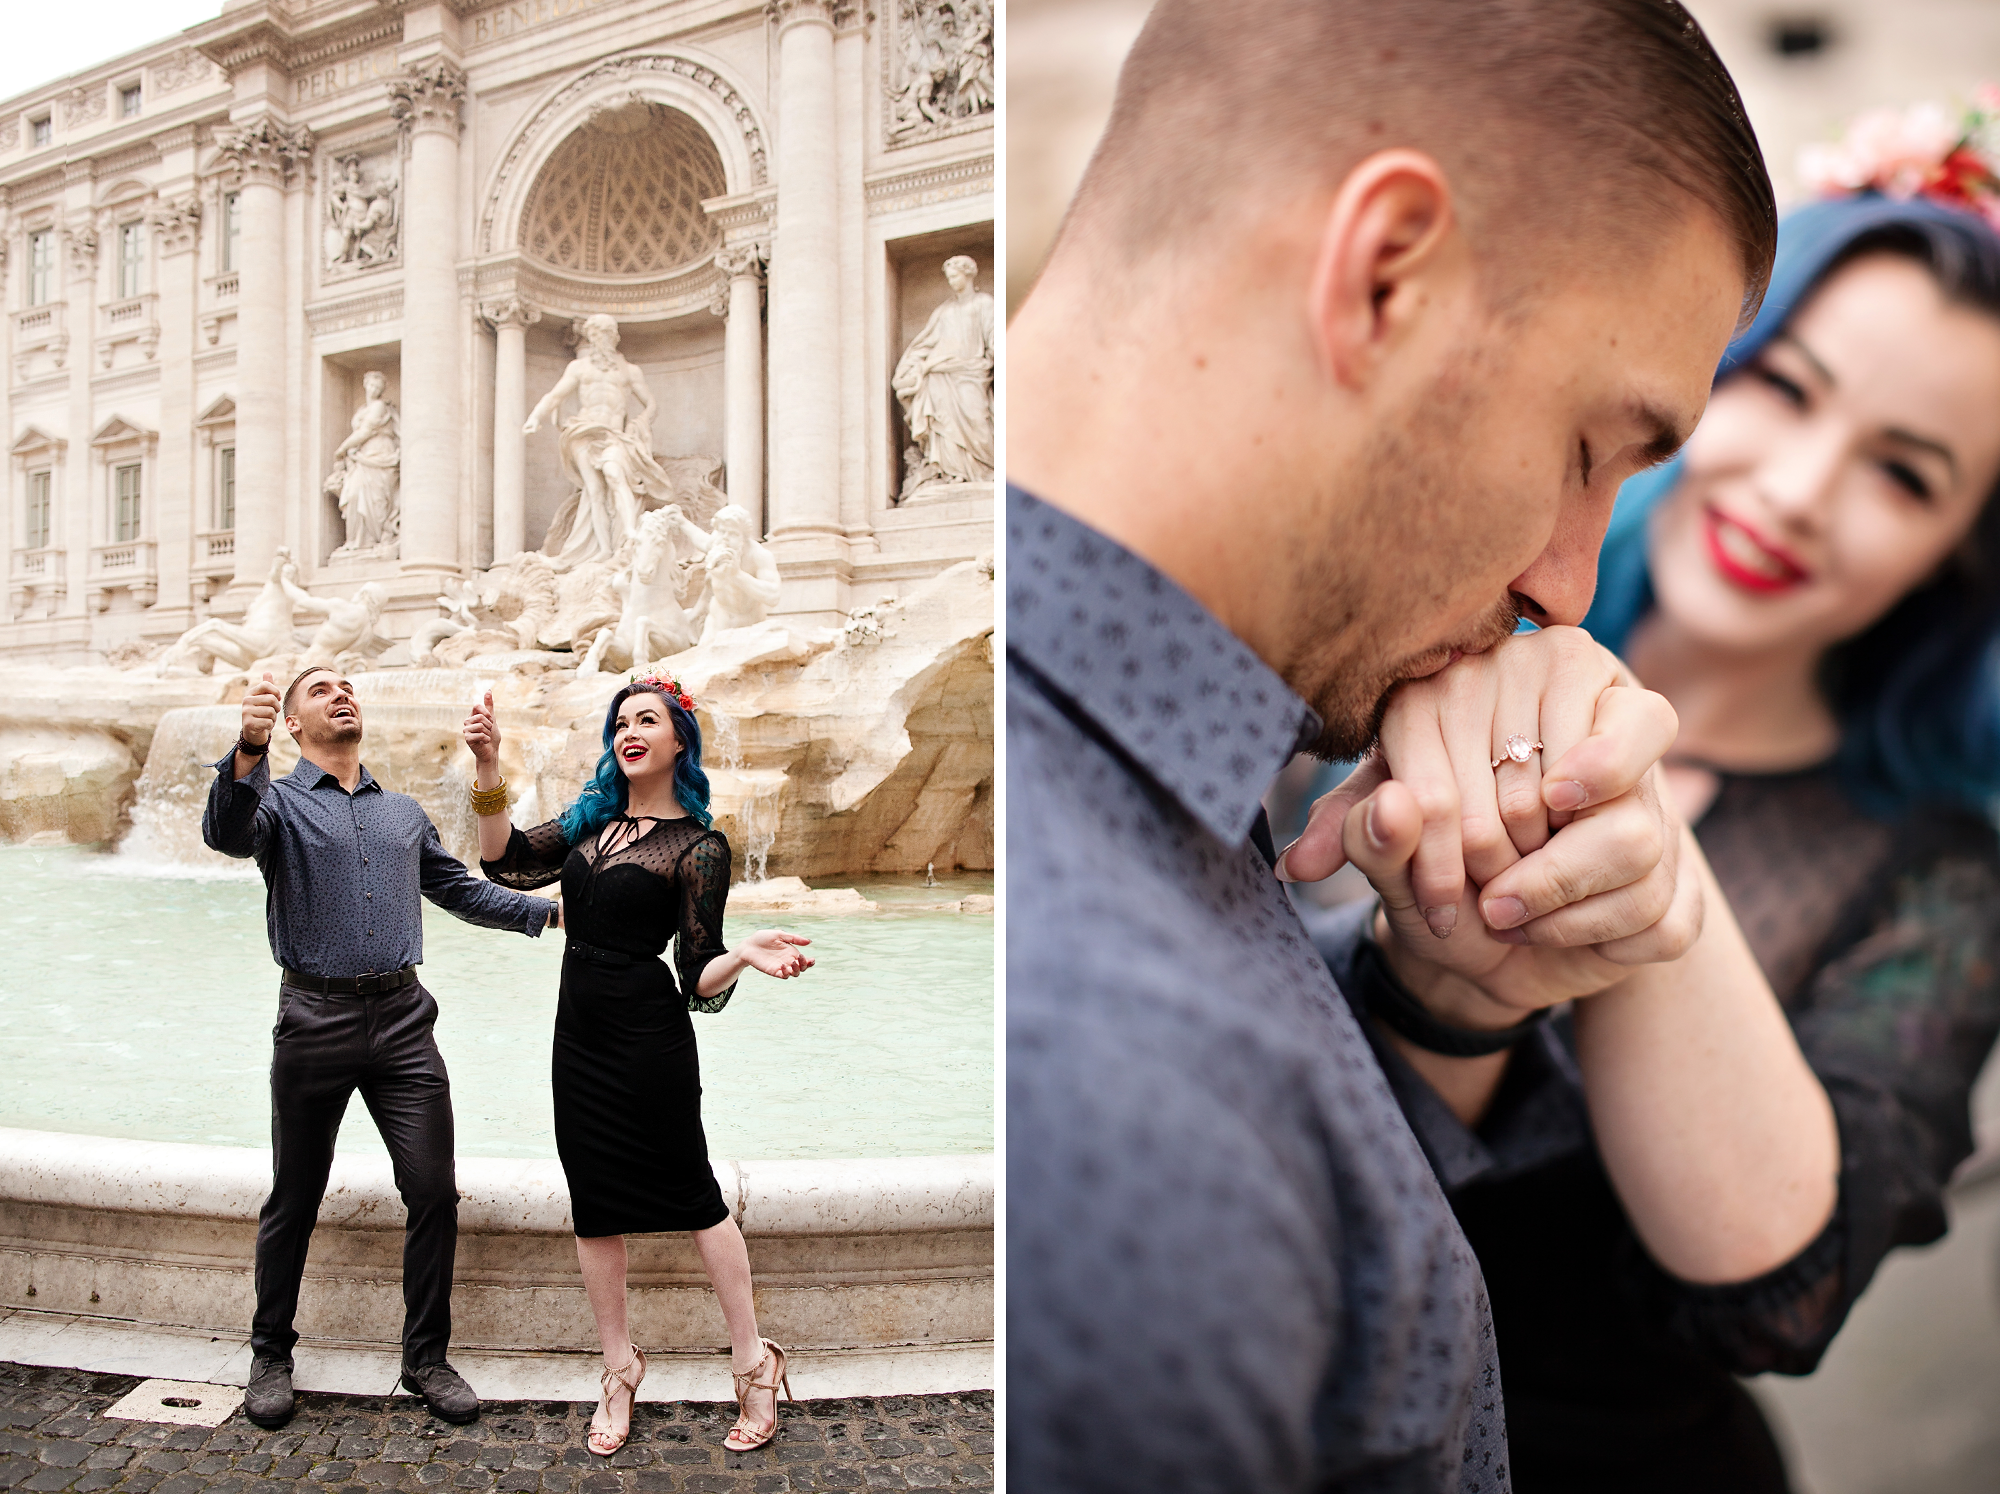 Honeymoon, vacation, family, engagement, maternity, wedding, love story individual and solo photoshoots in Rome, Italy by photographer Tricia Anne Photography | Rome Photographer, vacation, tripadvisor, instagram, fun, married, bride, groom, love story, photography session rome, photoshoot rome, wedding photographer, vacation photographer, Rome engagement photo shoot, rome honeymoon, rome wedding, elopement in Rome, honeymoon photographer rome, engagement photo shoot, English speaking photographer in Rome